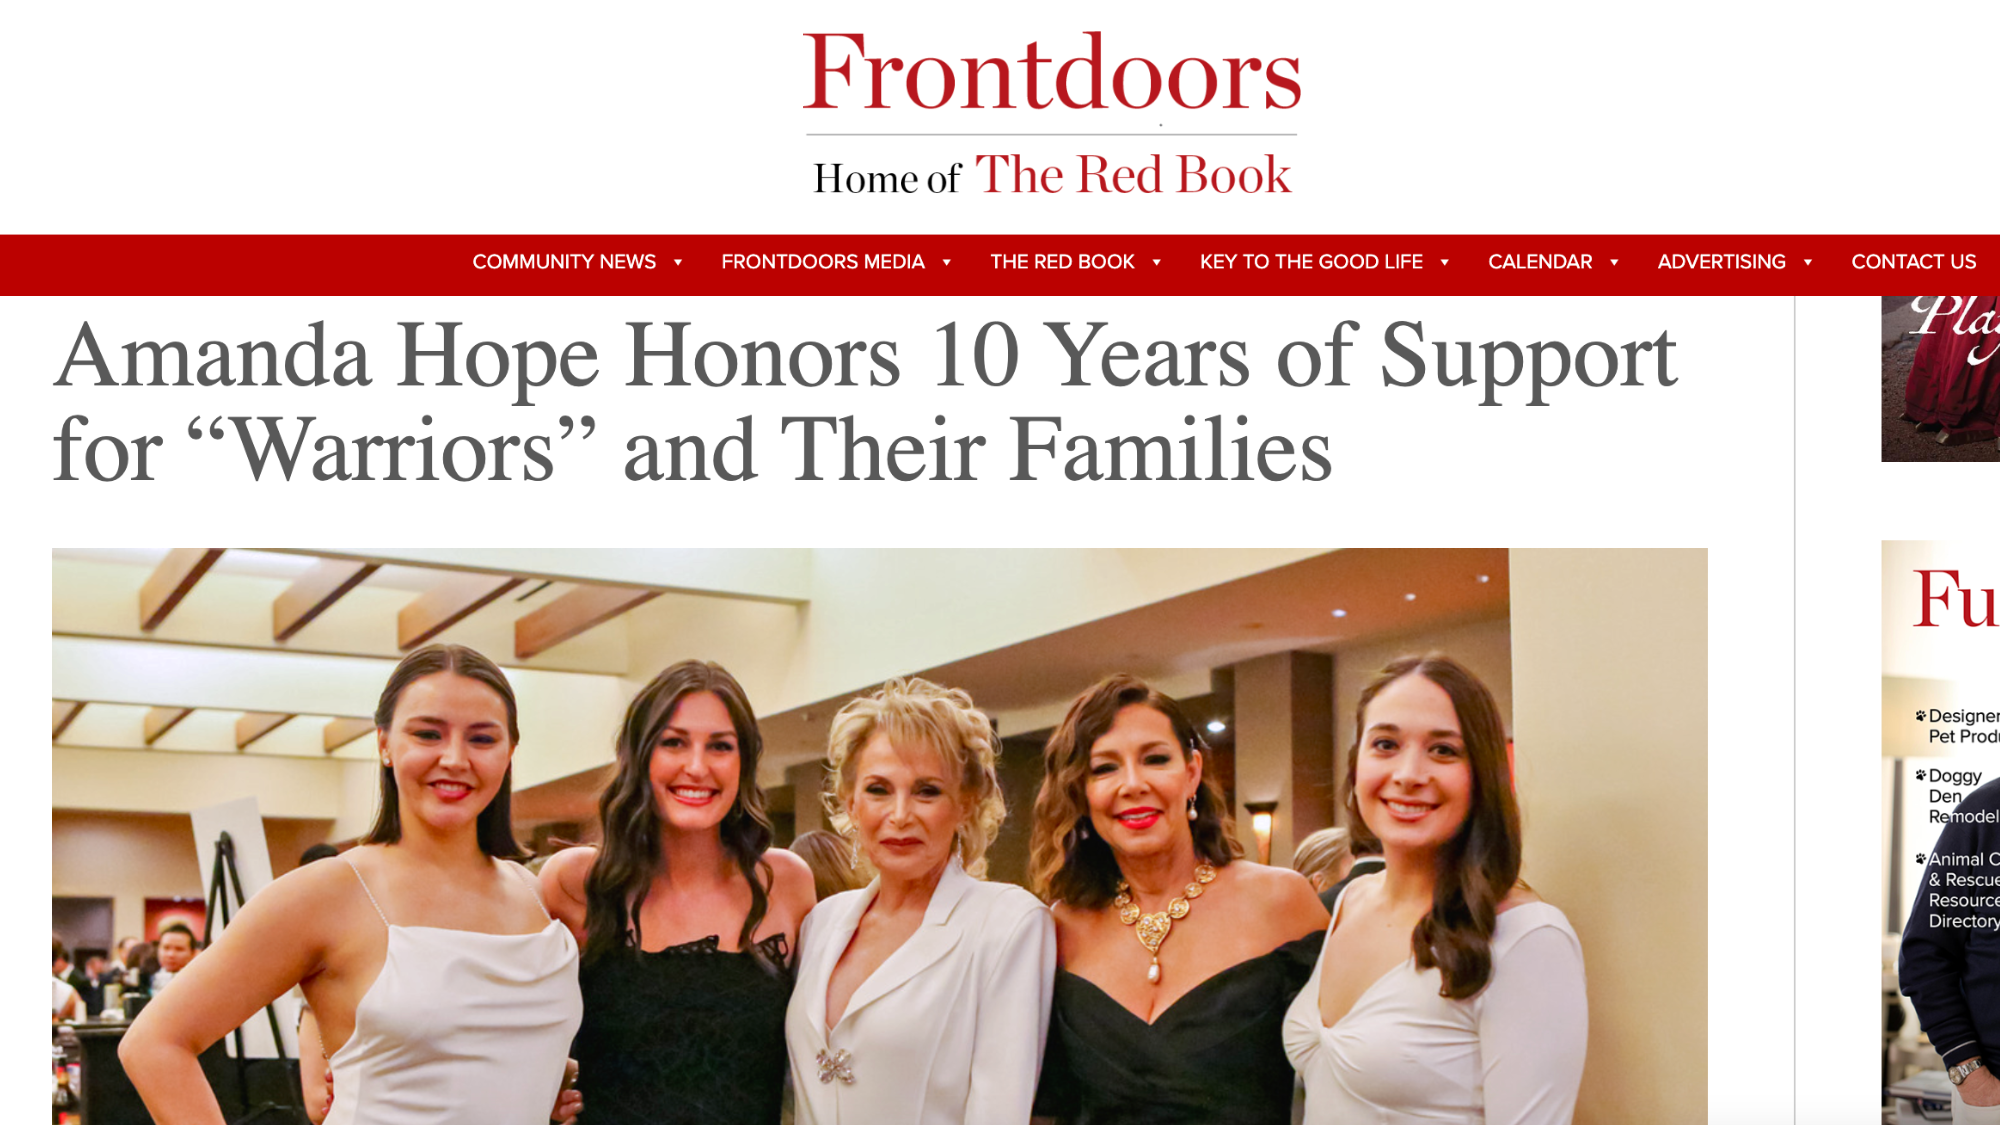 Frontdoors: Amanda Hope Honors 10 Years of Support for “Warriors” and Their Families (Copy)